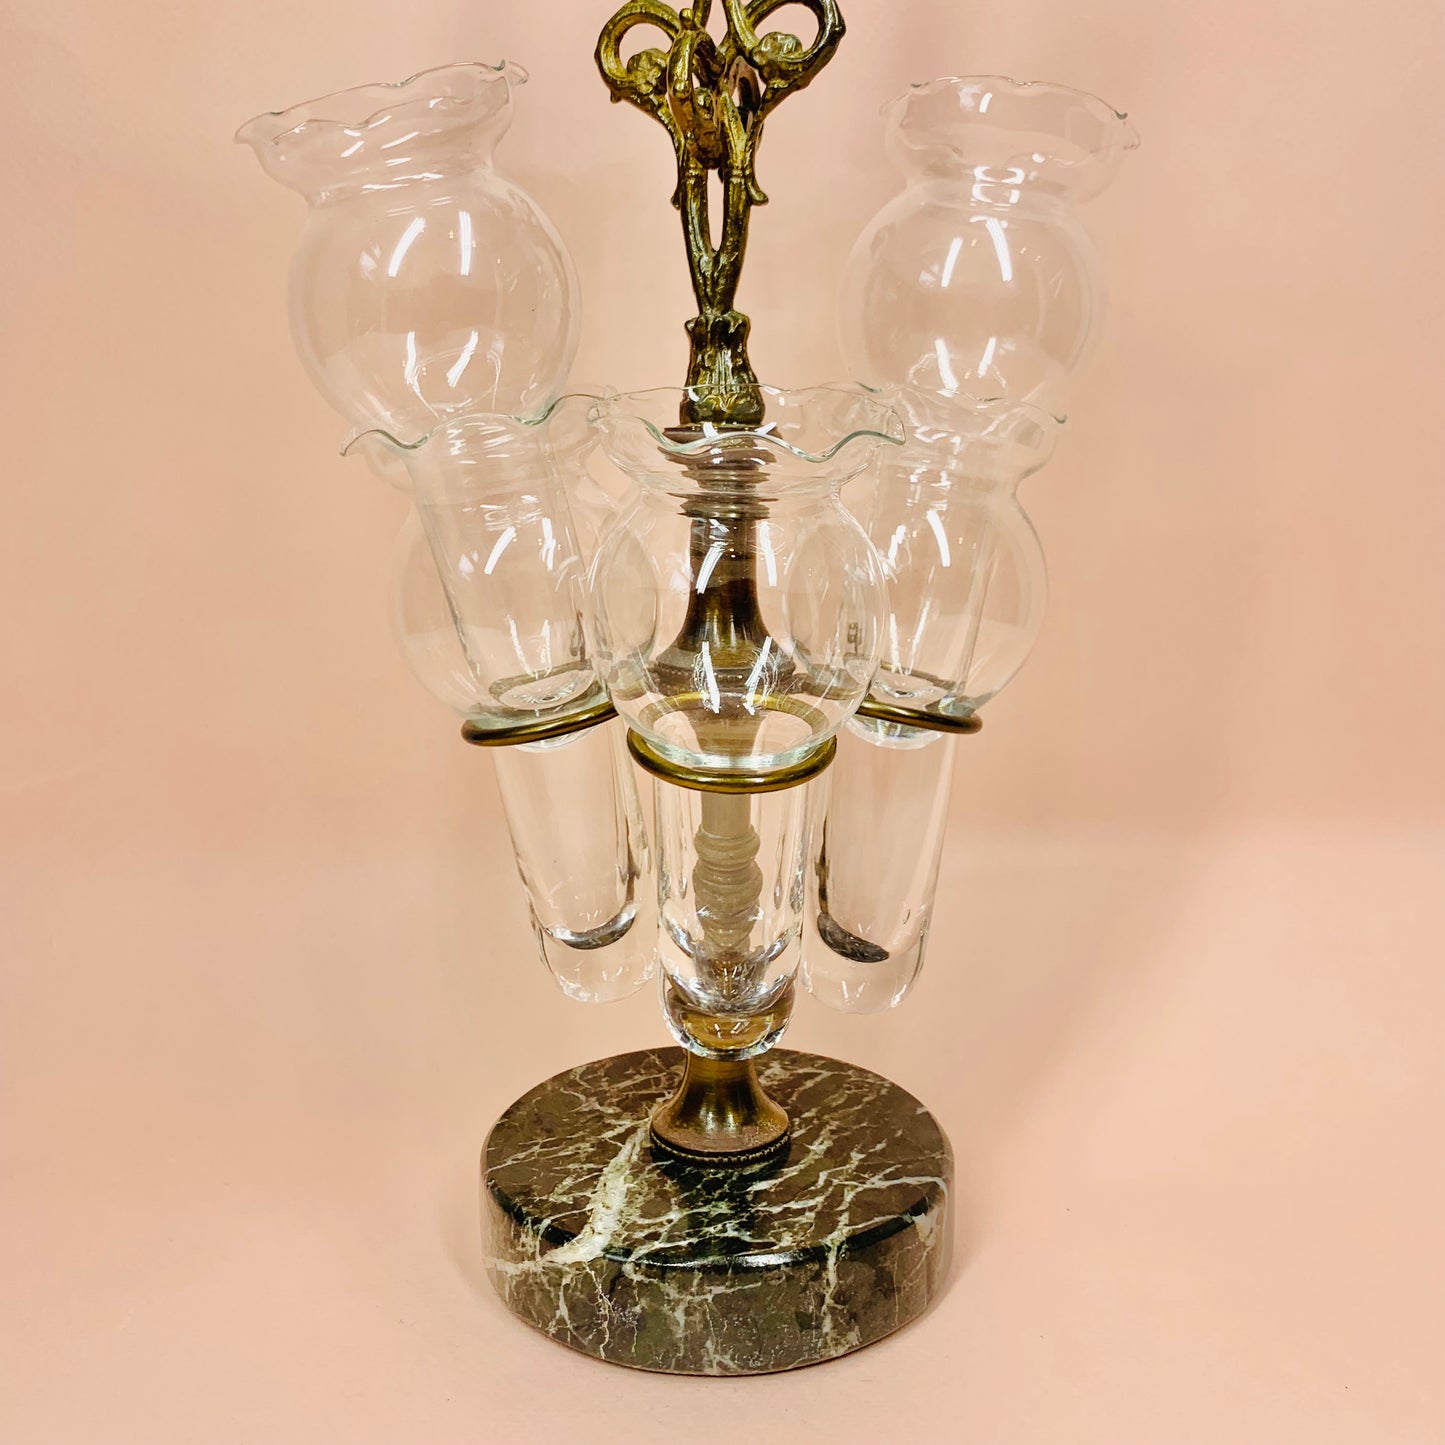 Antique Petite Choses brass epergne with rooster centrepiece and green marble base